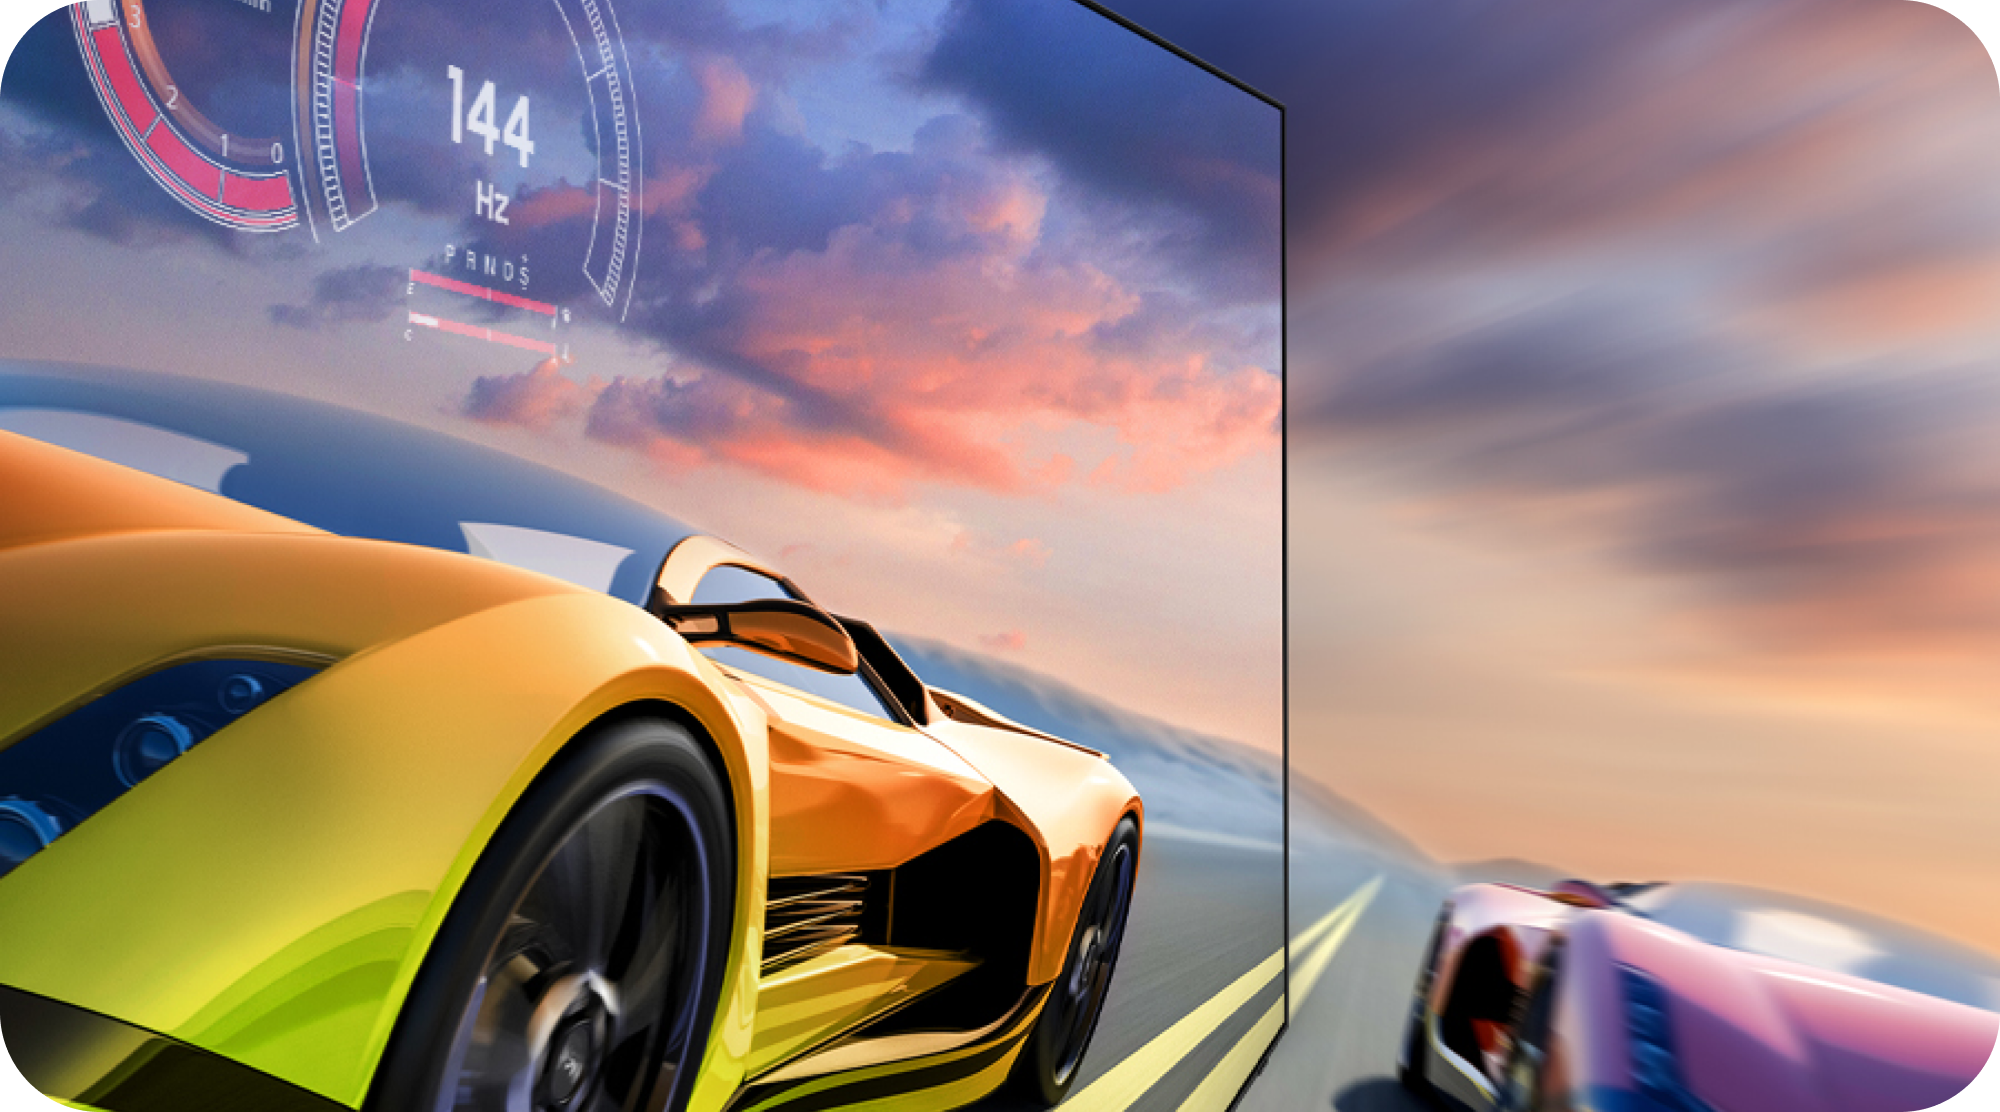 Samsung TV with MotionXcelerator and a racing car in the TV screen